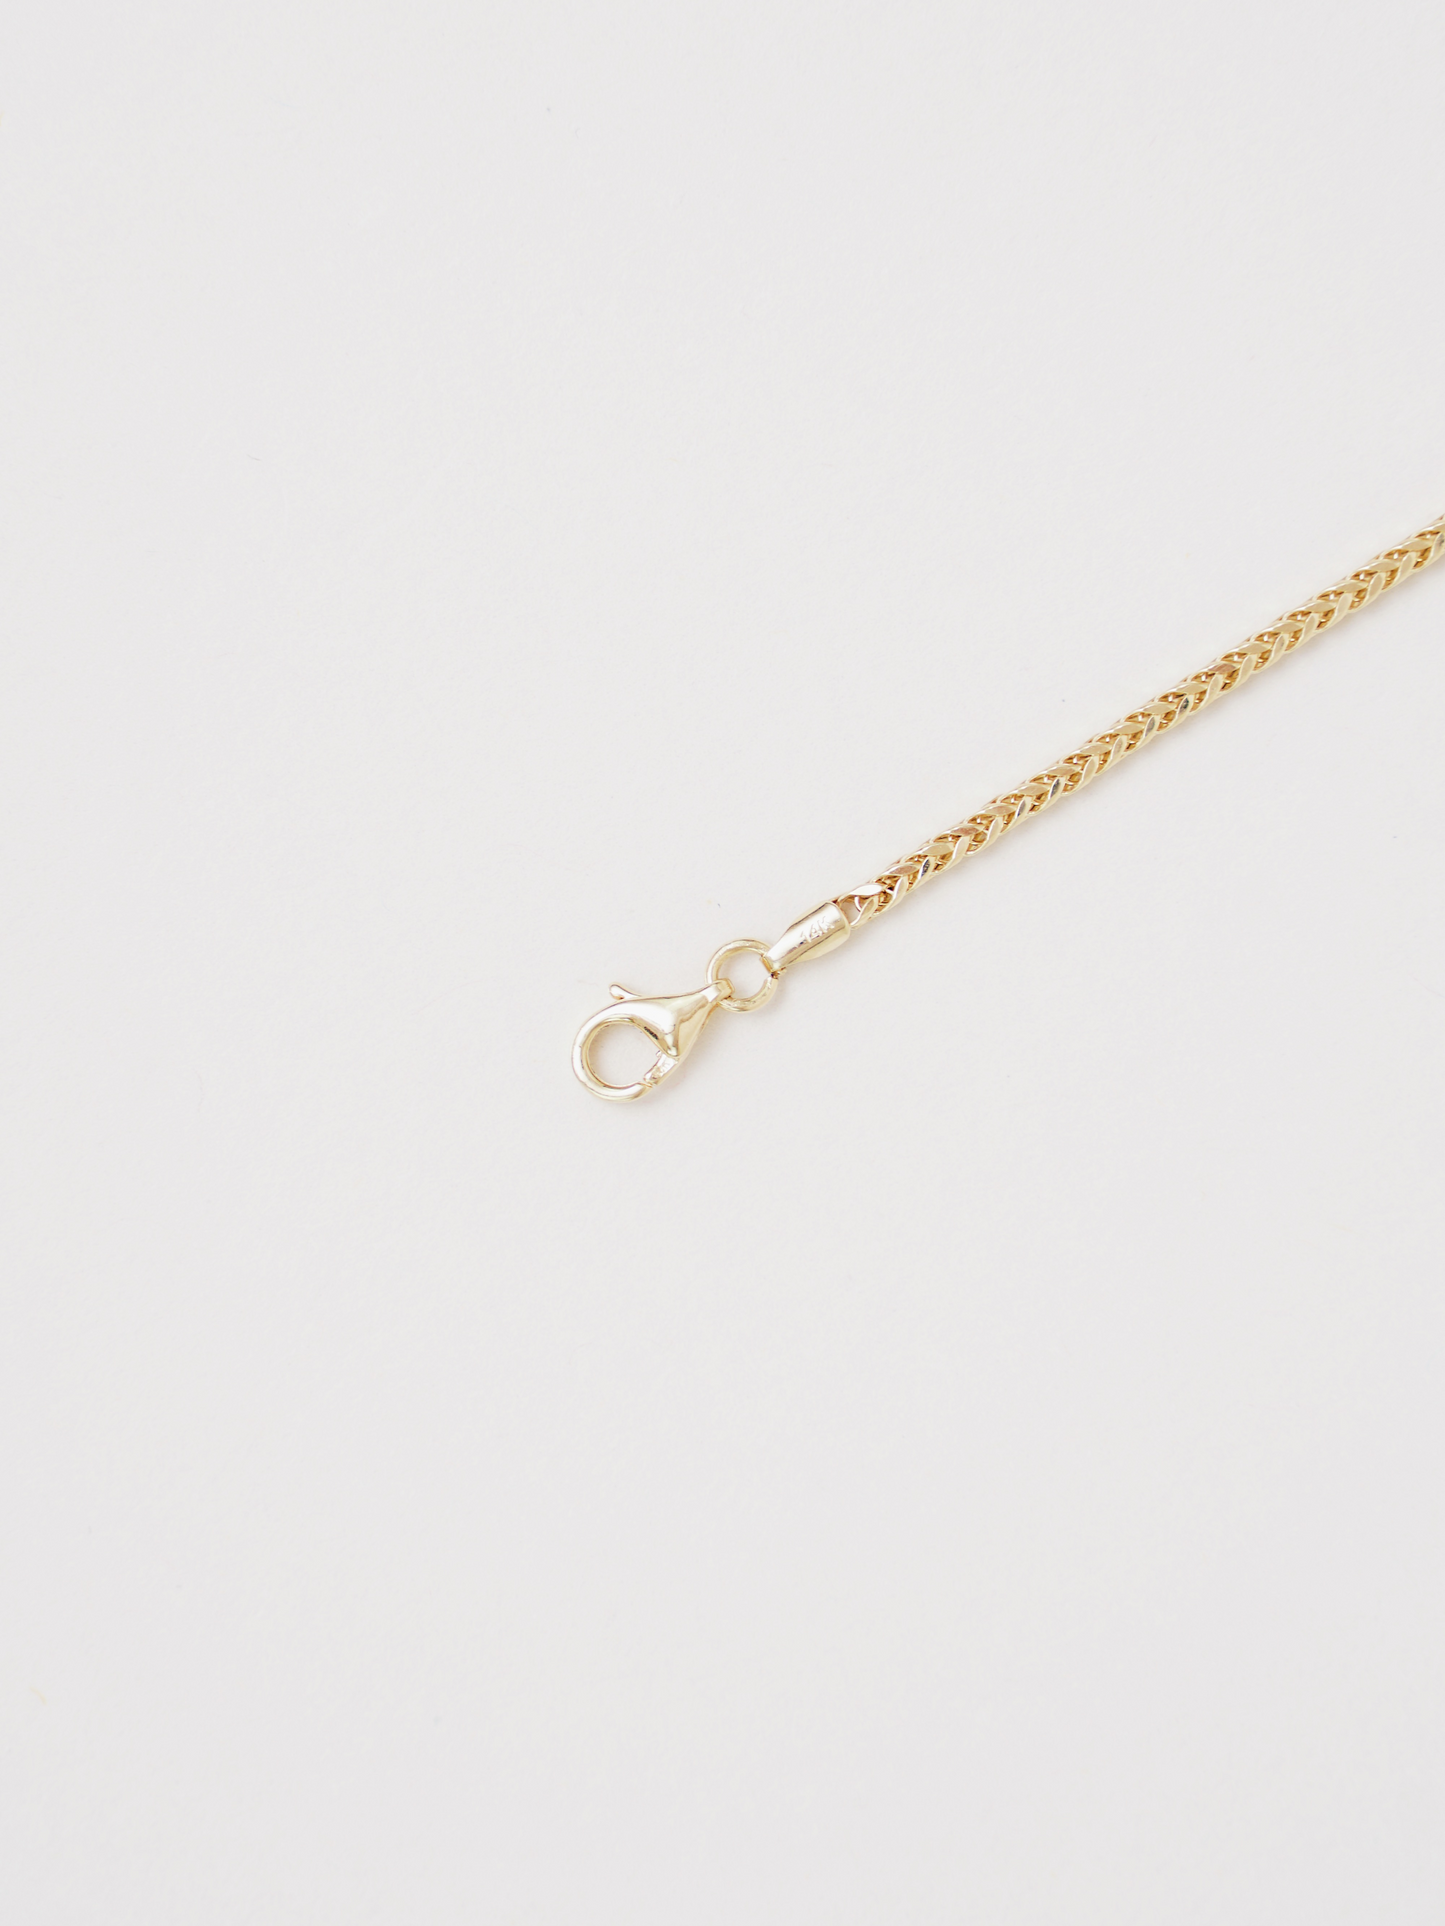 20" Weath x Light Necklace - Yellow Gold